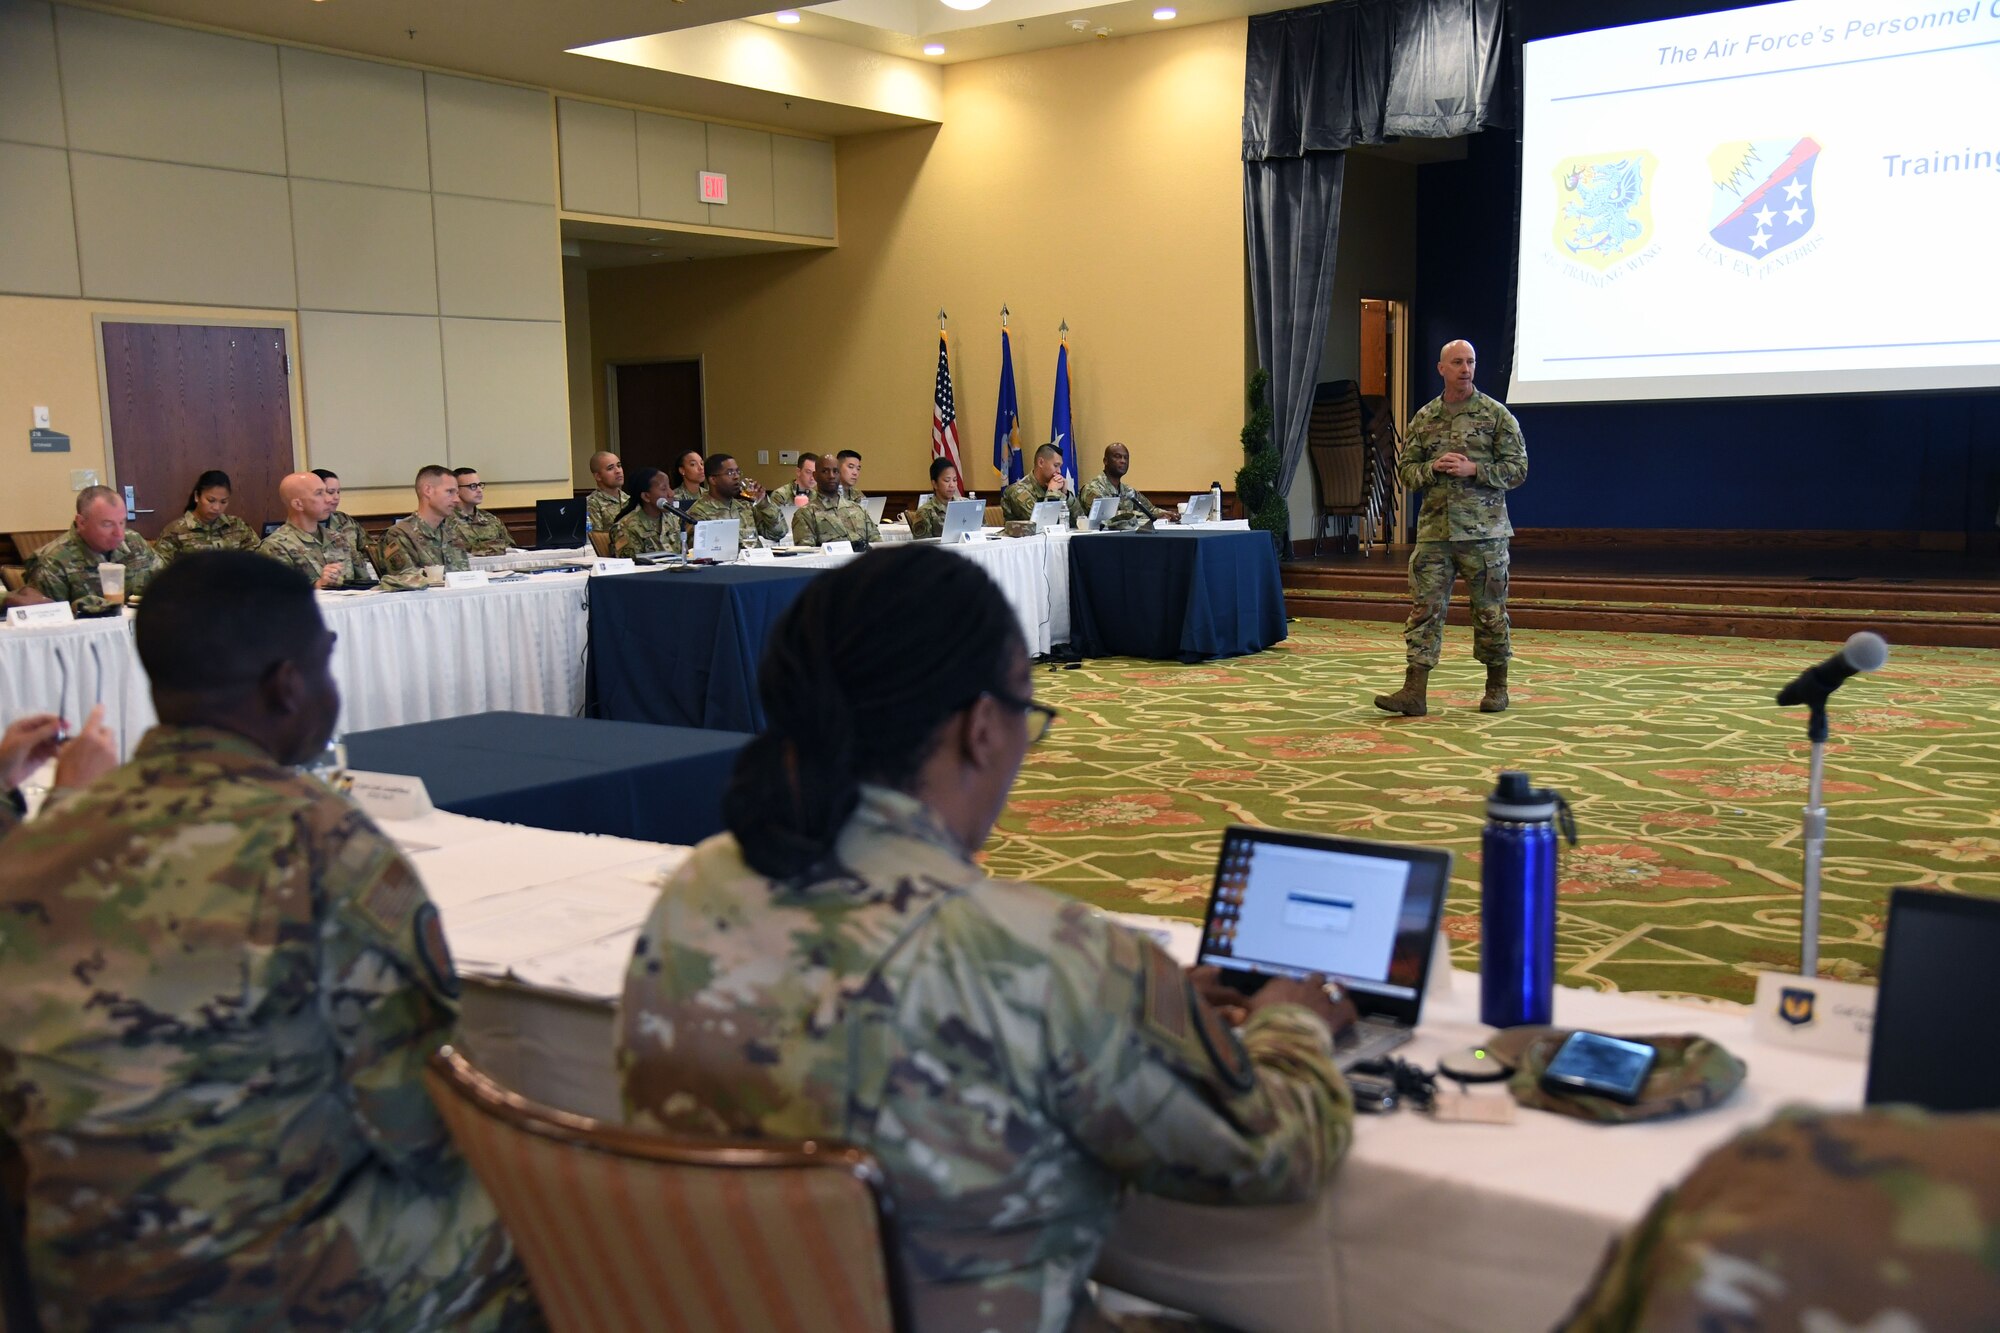 U.S. Air Force Col. William Hunter, 81st Training Wing commander, delivers remarks during the Cyberspace Operations Officer Development Team Summit in the Bay Breeze Event Center at Keesler Air Force Base, Mississippi, August 15, 2022. Lt. Gen. Leah Lauderback, Deputy Chief of Staff for Intelligence, Surveillance, Reconnaissance and Cyber Effects Operations, Headquarters U.S. Air Force, the Pentagon, Arlington, Virginia, and her team attended the summit and also toured the 333rd Training Squadron and 336th Training Squadron to meet and greet squadron personnel, understand the squadron's mission and be briefed on new innovations. (U.S. Air Force photo by Kemberly Groue)